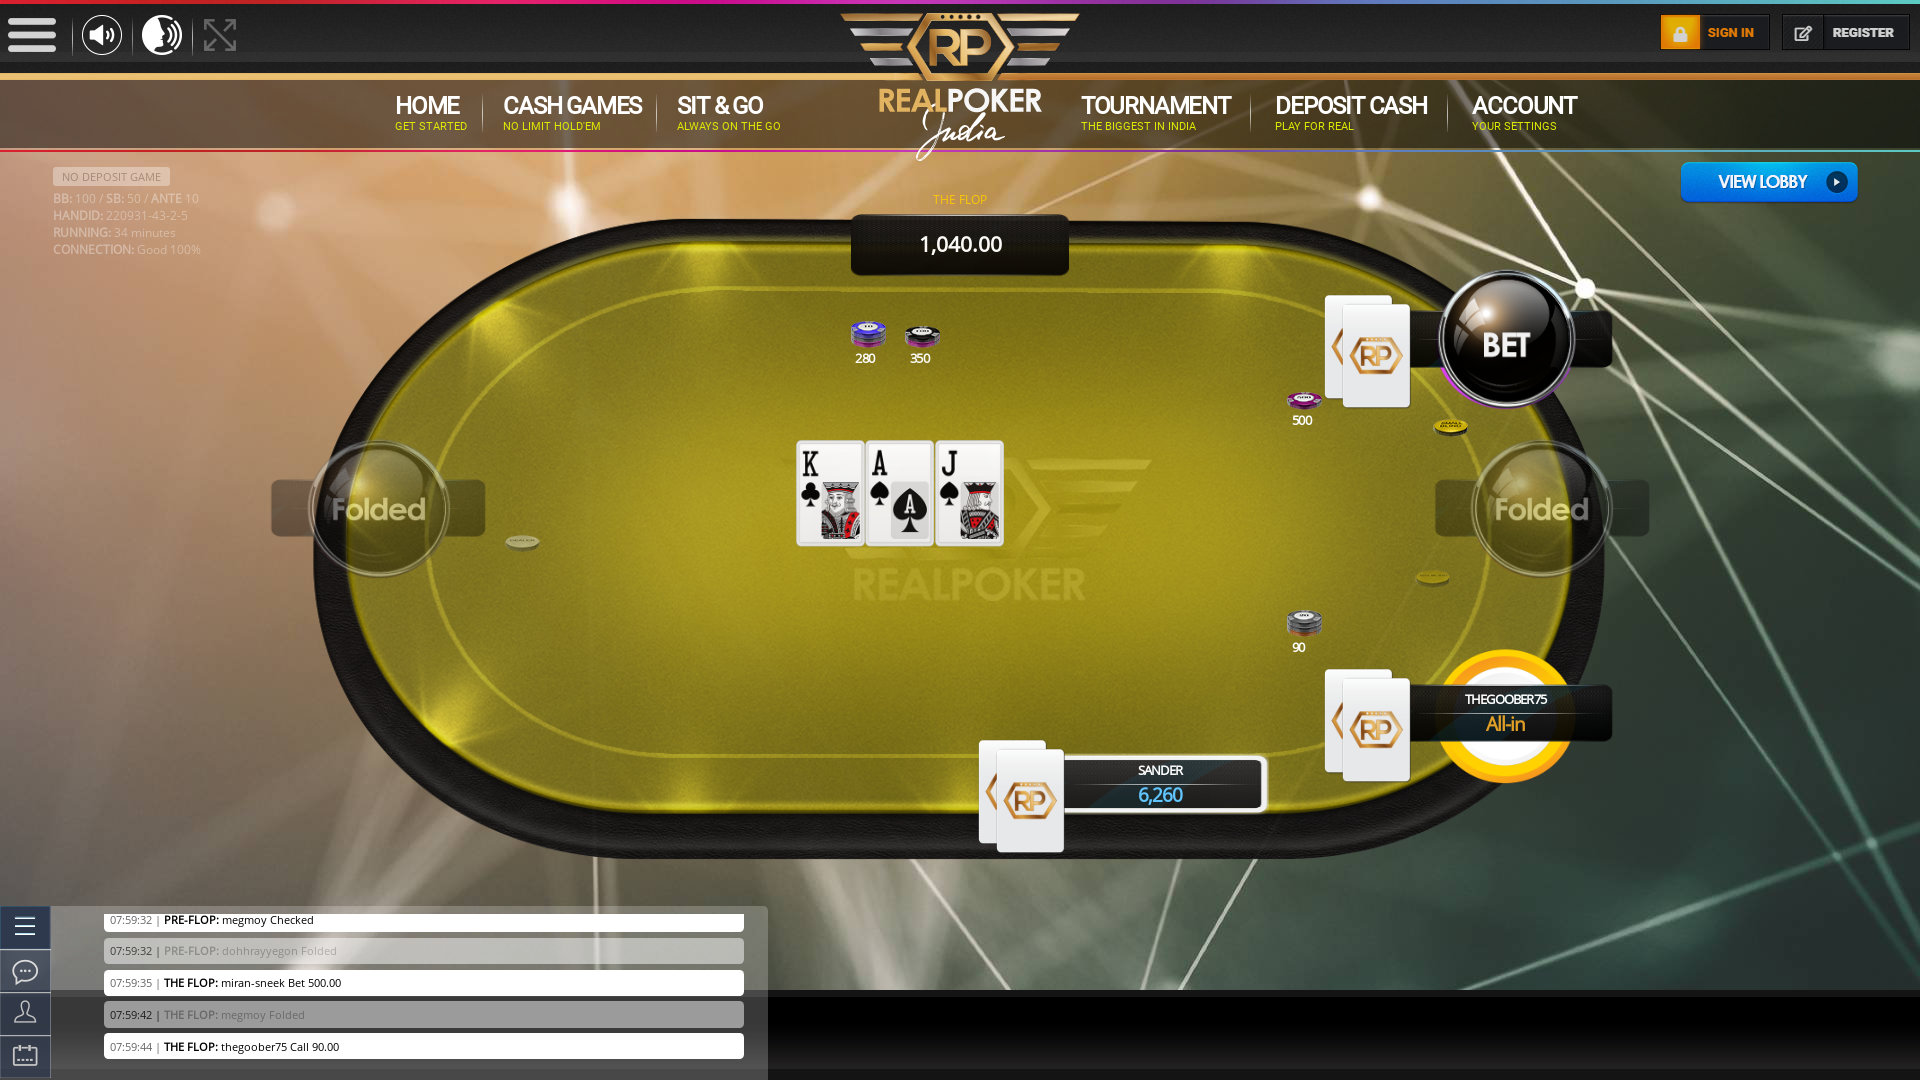 Indian poker on a 10 player table in the 33rd minute